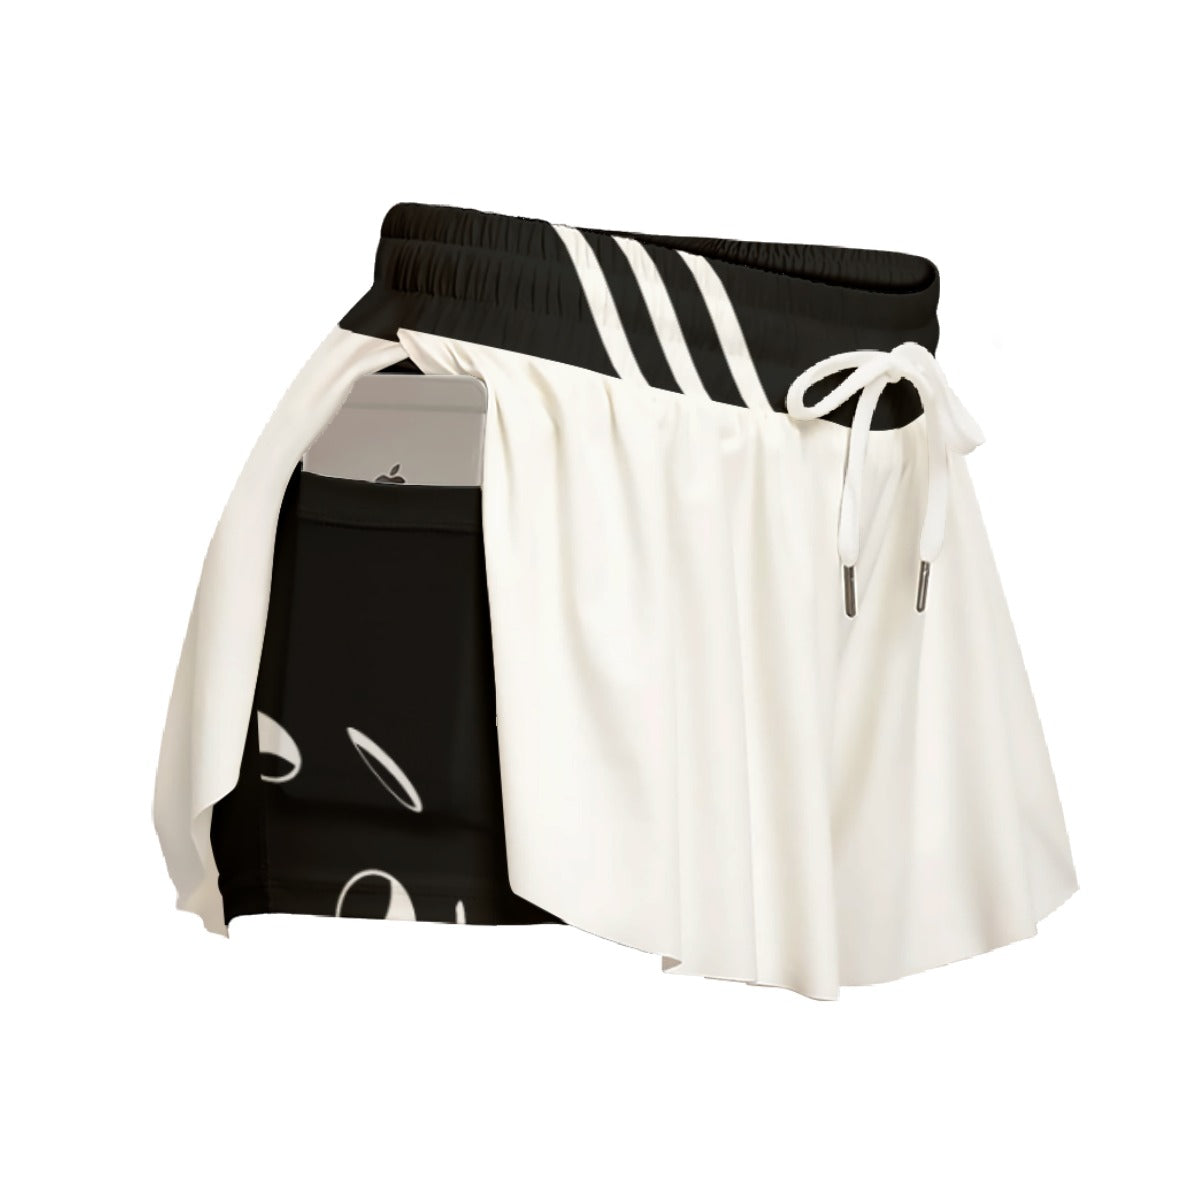 Lisa - White/Black Ball - Pickleball Women's Sport Culottes With Pockets by Dizzy Pickle